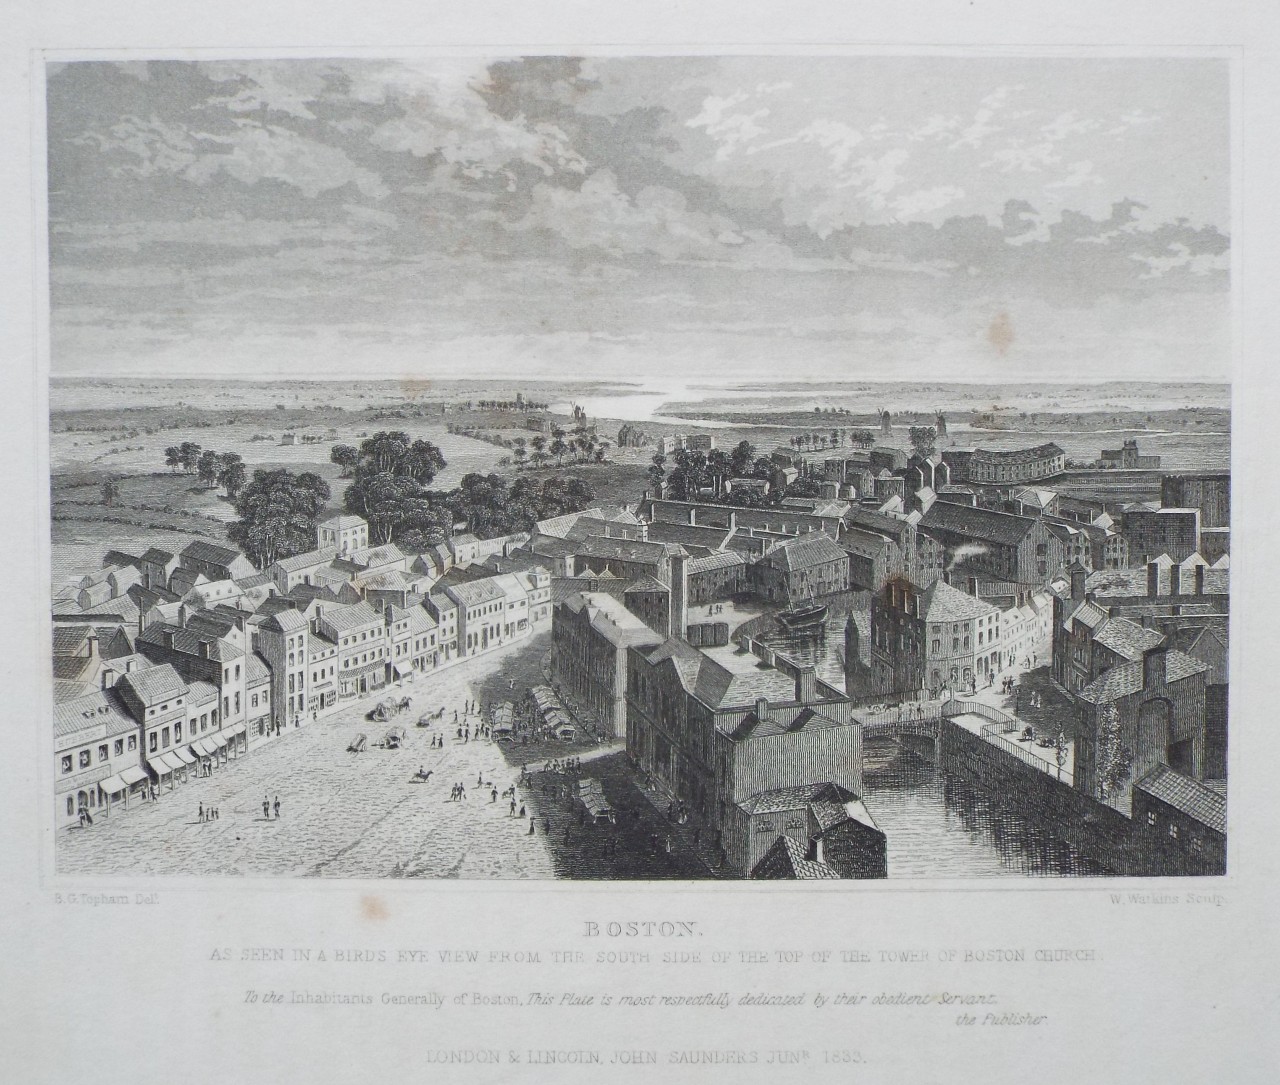 Print - Boston as seen in a Birds Eye View from the South side of the Top of the Tower of Boston Church. - Watkins